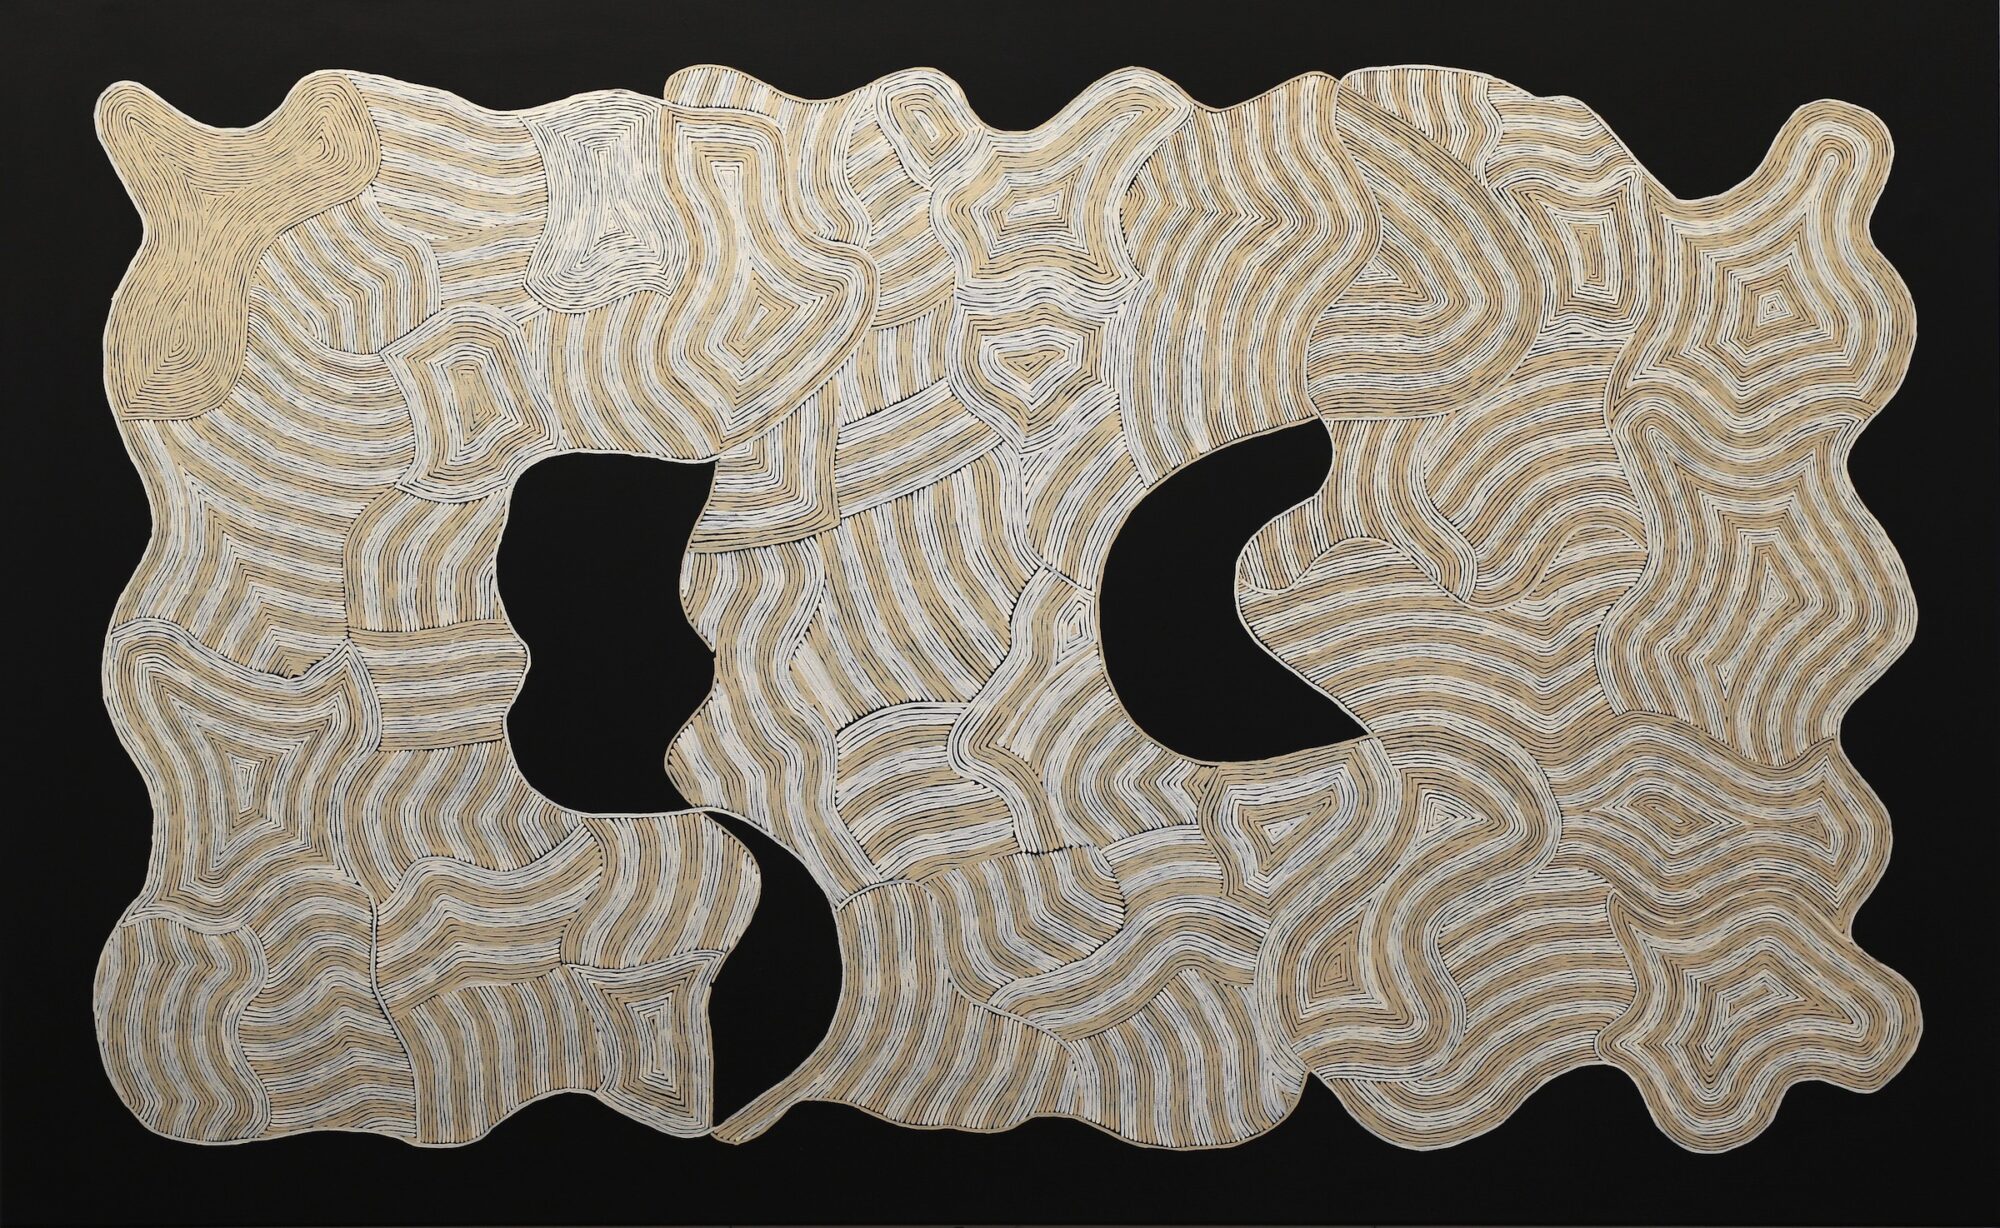 Abstract design painted in cream and pale yellow on a black background.